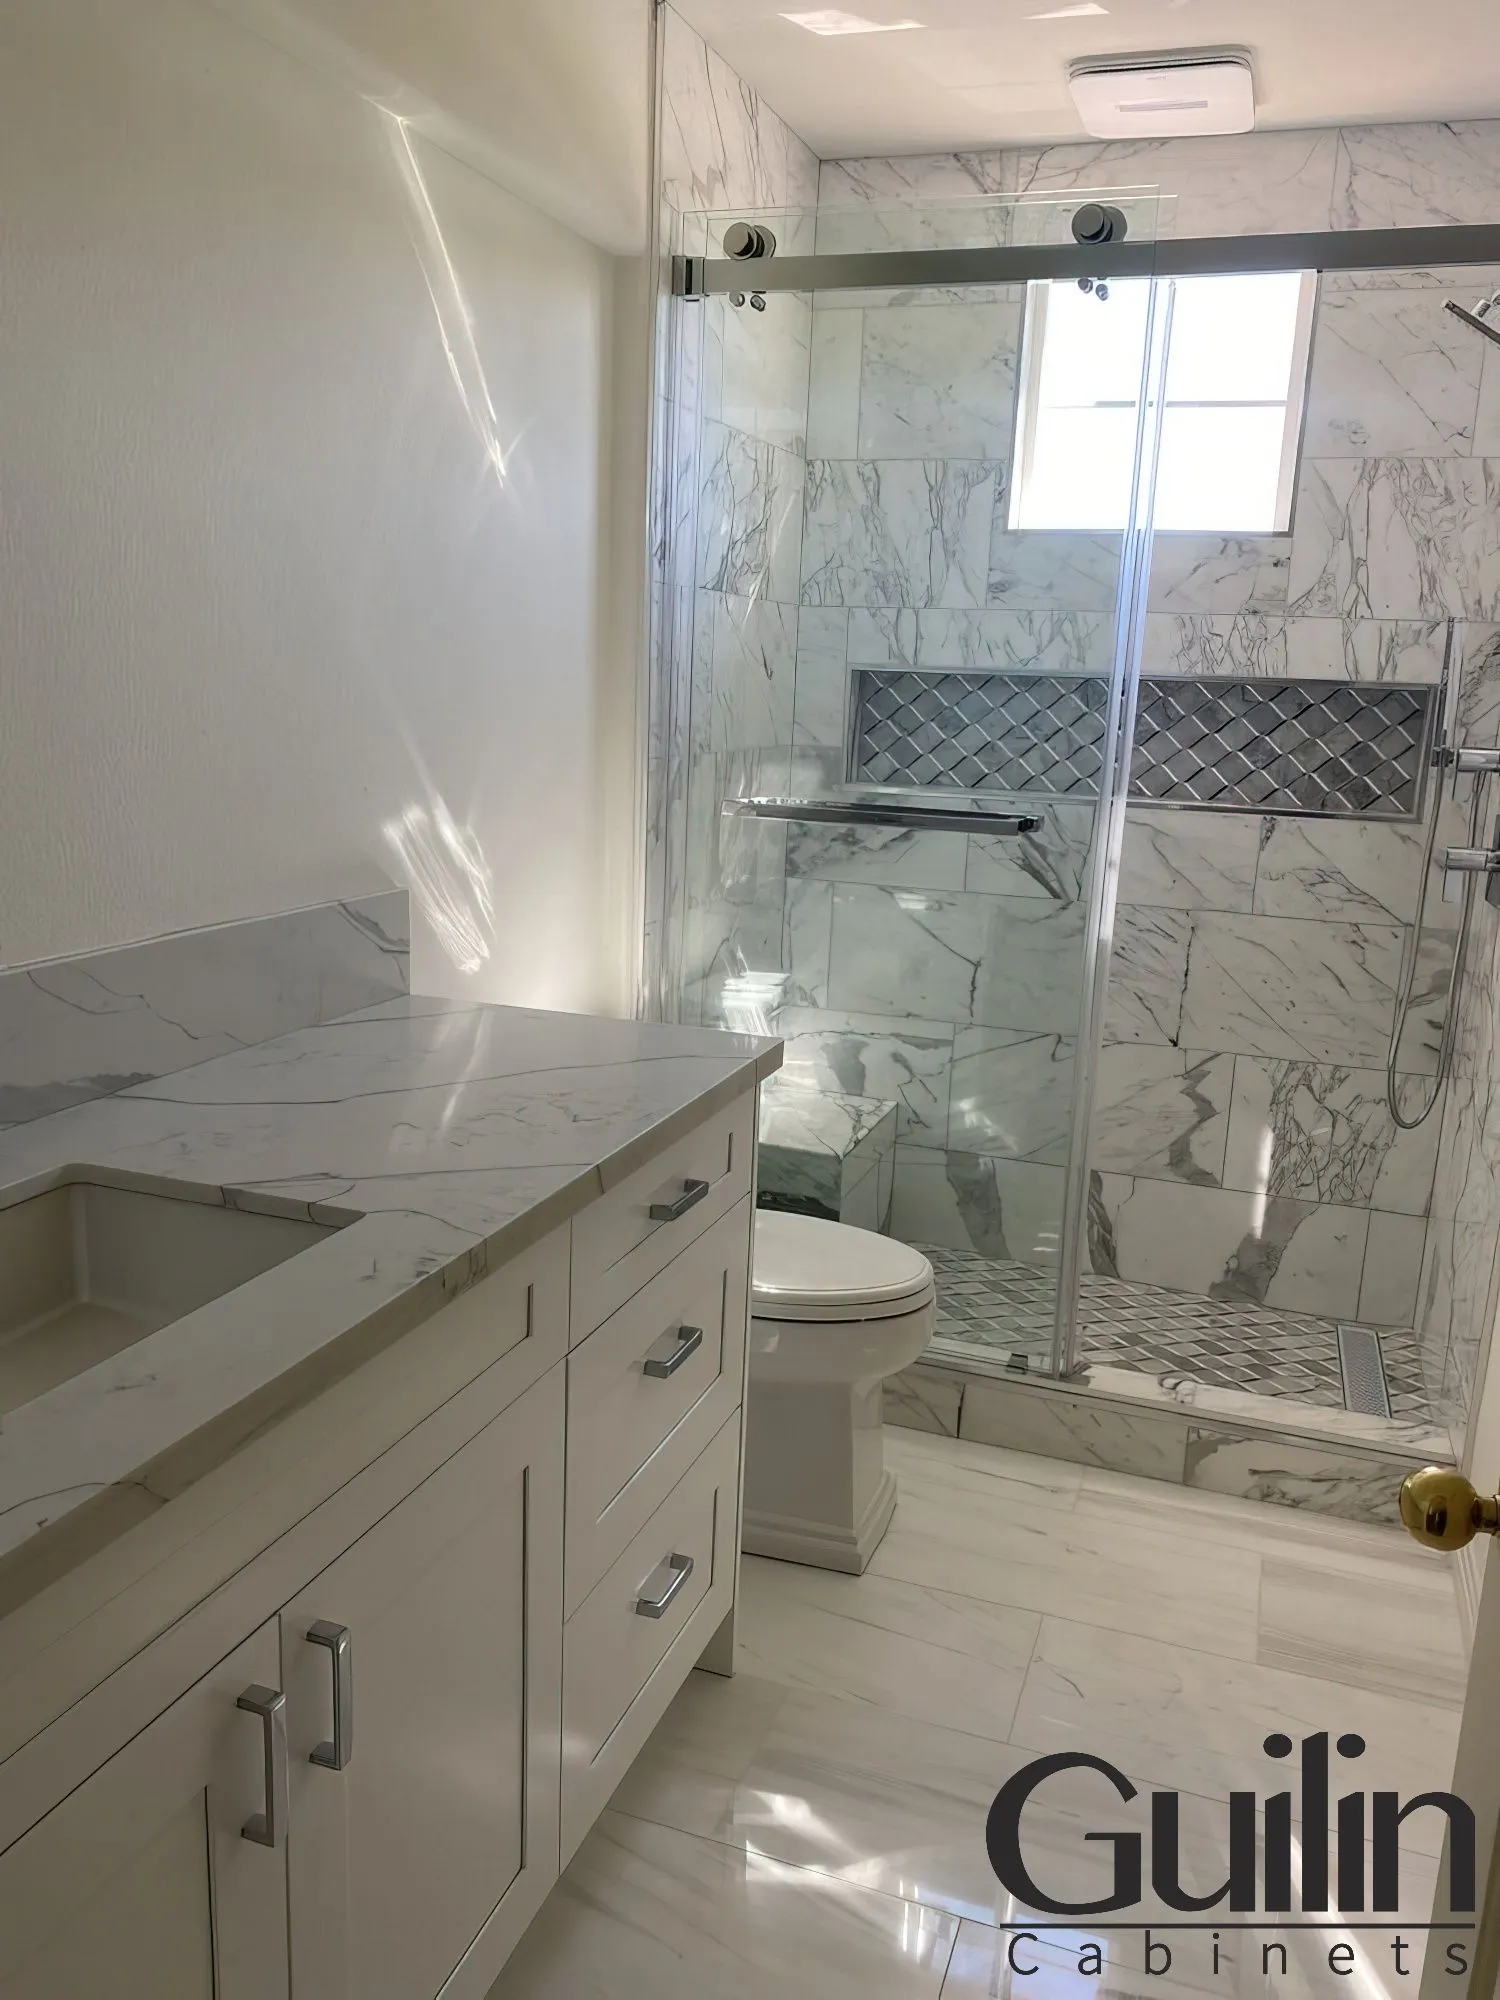 Three-quarter bathrooms are a homeowner's best friend to save time and effort on cleaning and maintenance.